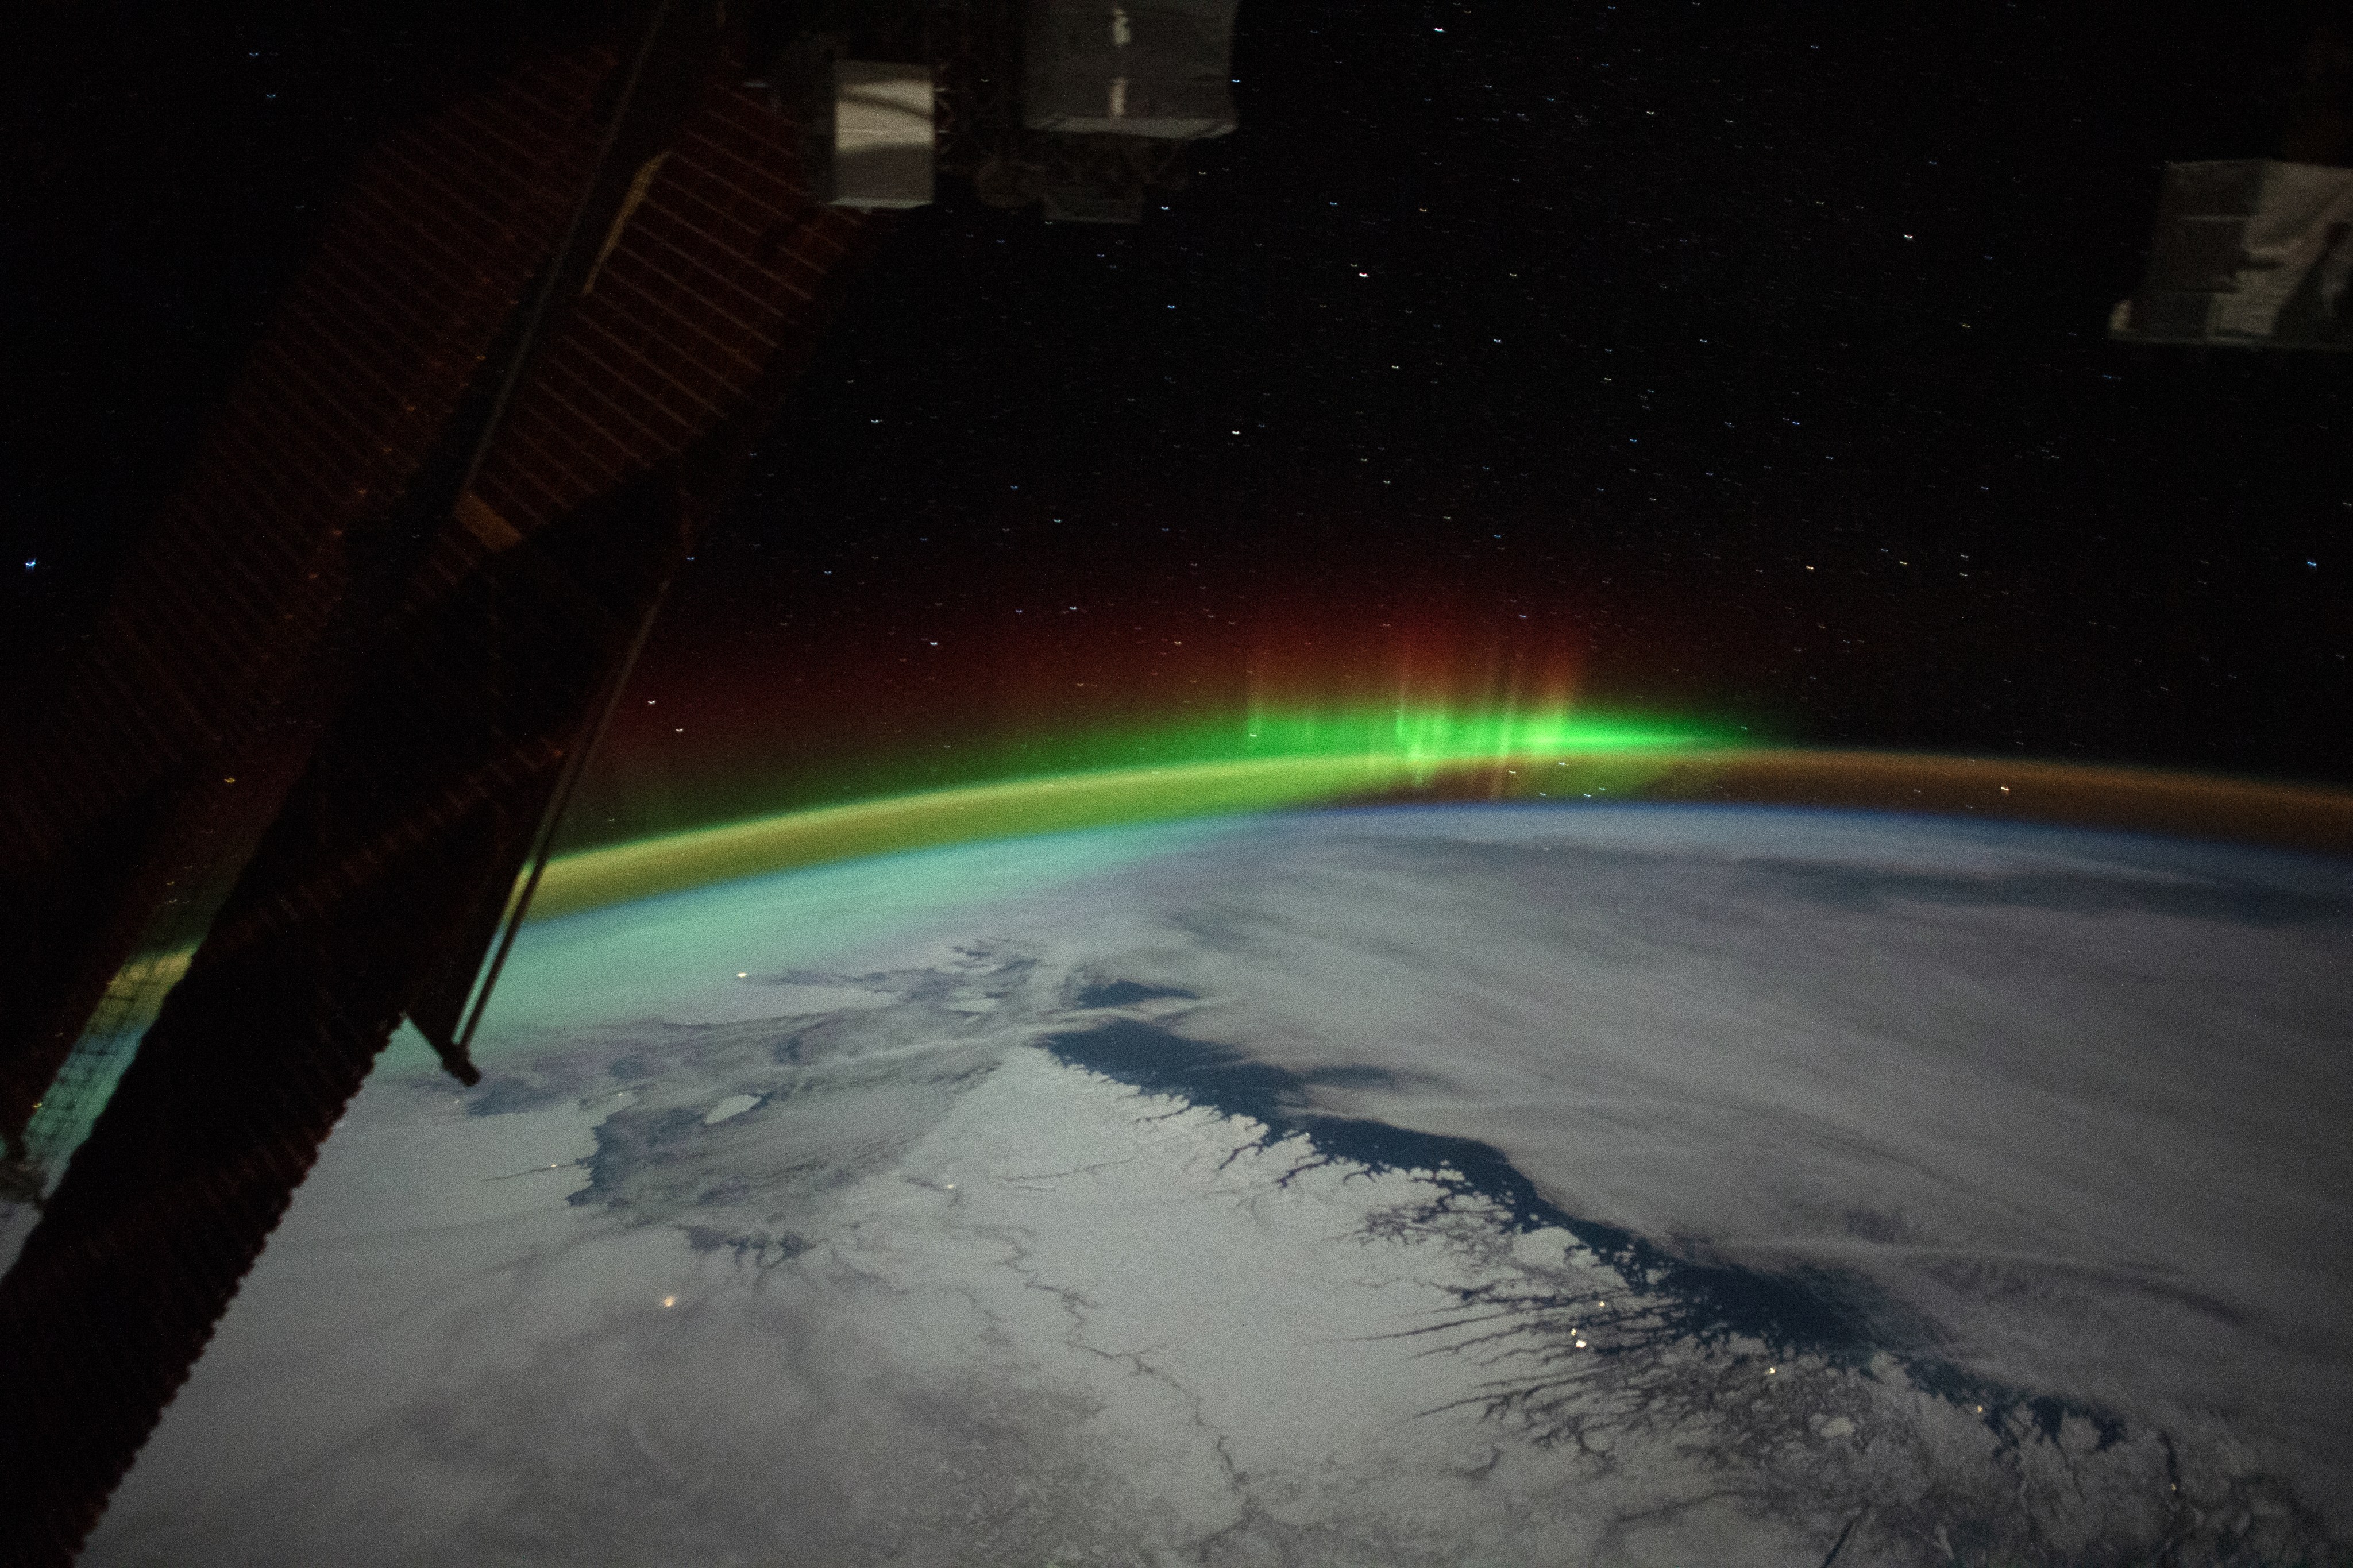 An astronaut aboard the International Space Station took this photo of eastern Canada. The image was taken near the northernmost limit of the station’s inclined equatorial orbit, which tops out about 52 degrees north of the equator. The perspective includes a view of space station’s solar panels in the foreground, Earth’s horizon about 1,500 kilometers (930 miles) away, and celestial objects far in the distance. Lights, snow, and clouds brighten the winter scene on Earth.